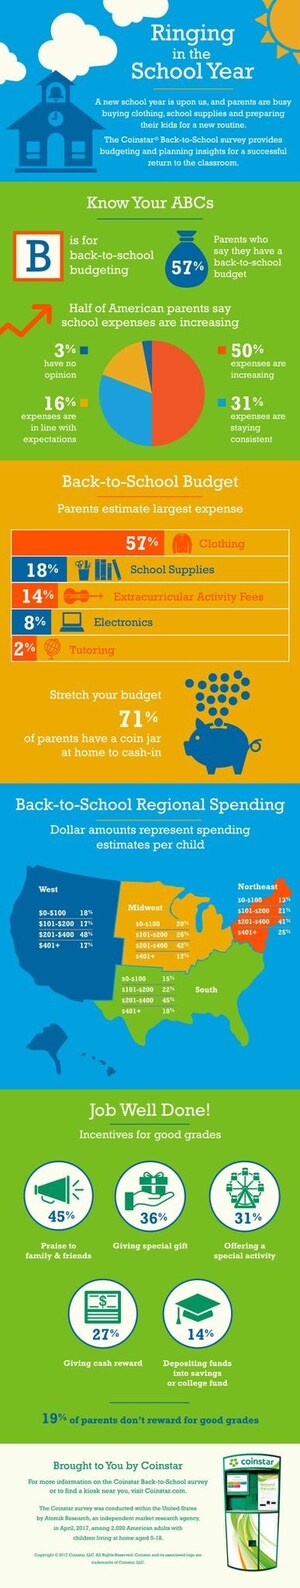 New Survey from Coinstar Reveals Insights for Back-to-School Budgeting